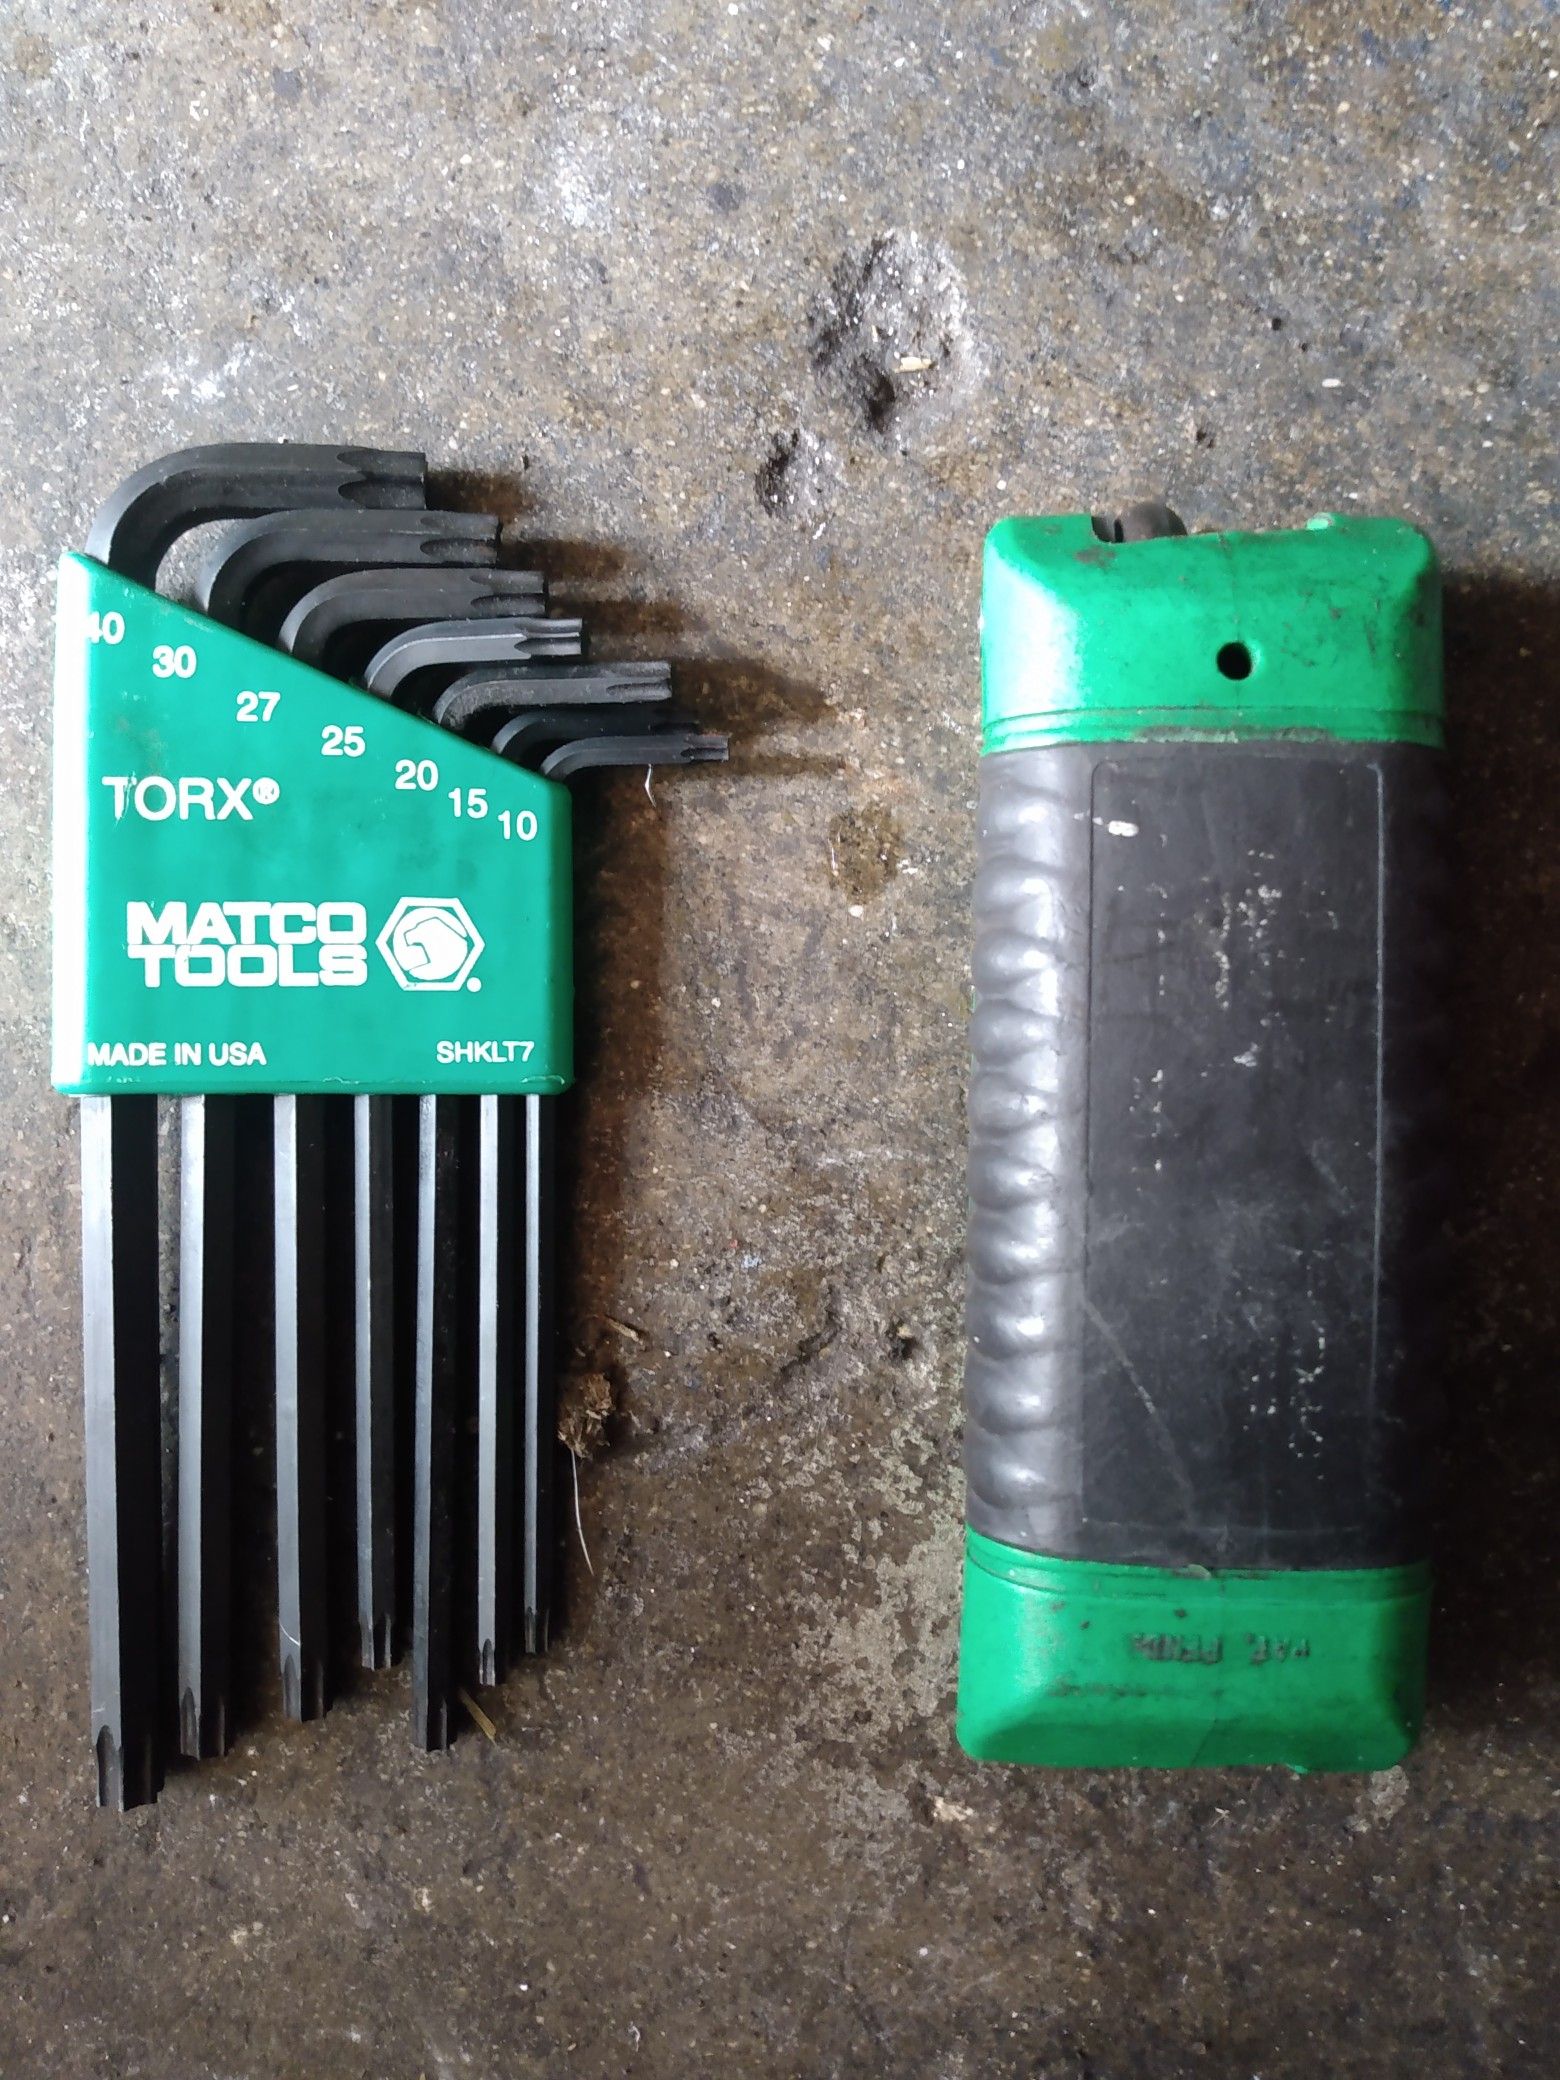 Matco Tools and Snap-On Torx Allen Wrench Sets